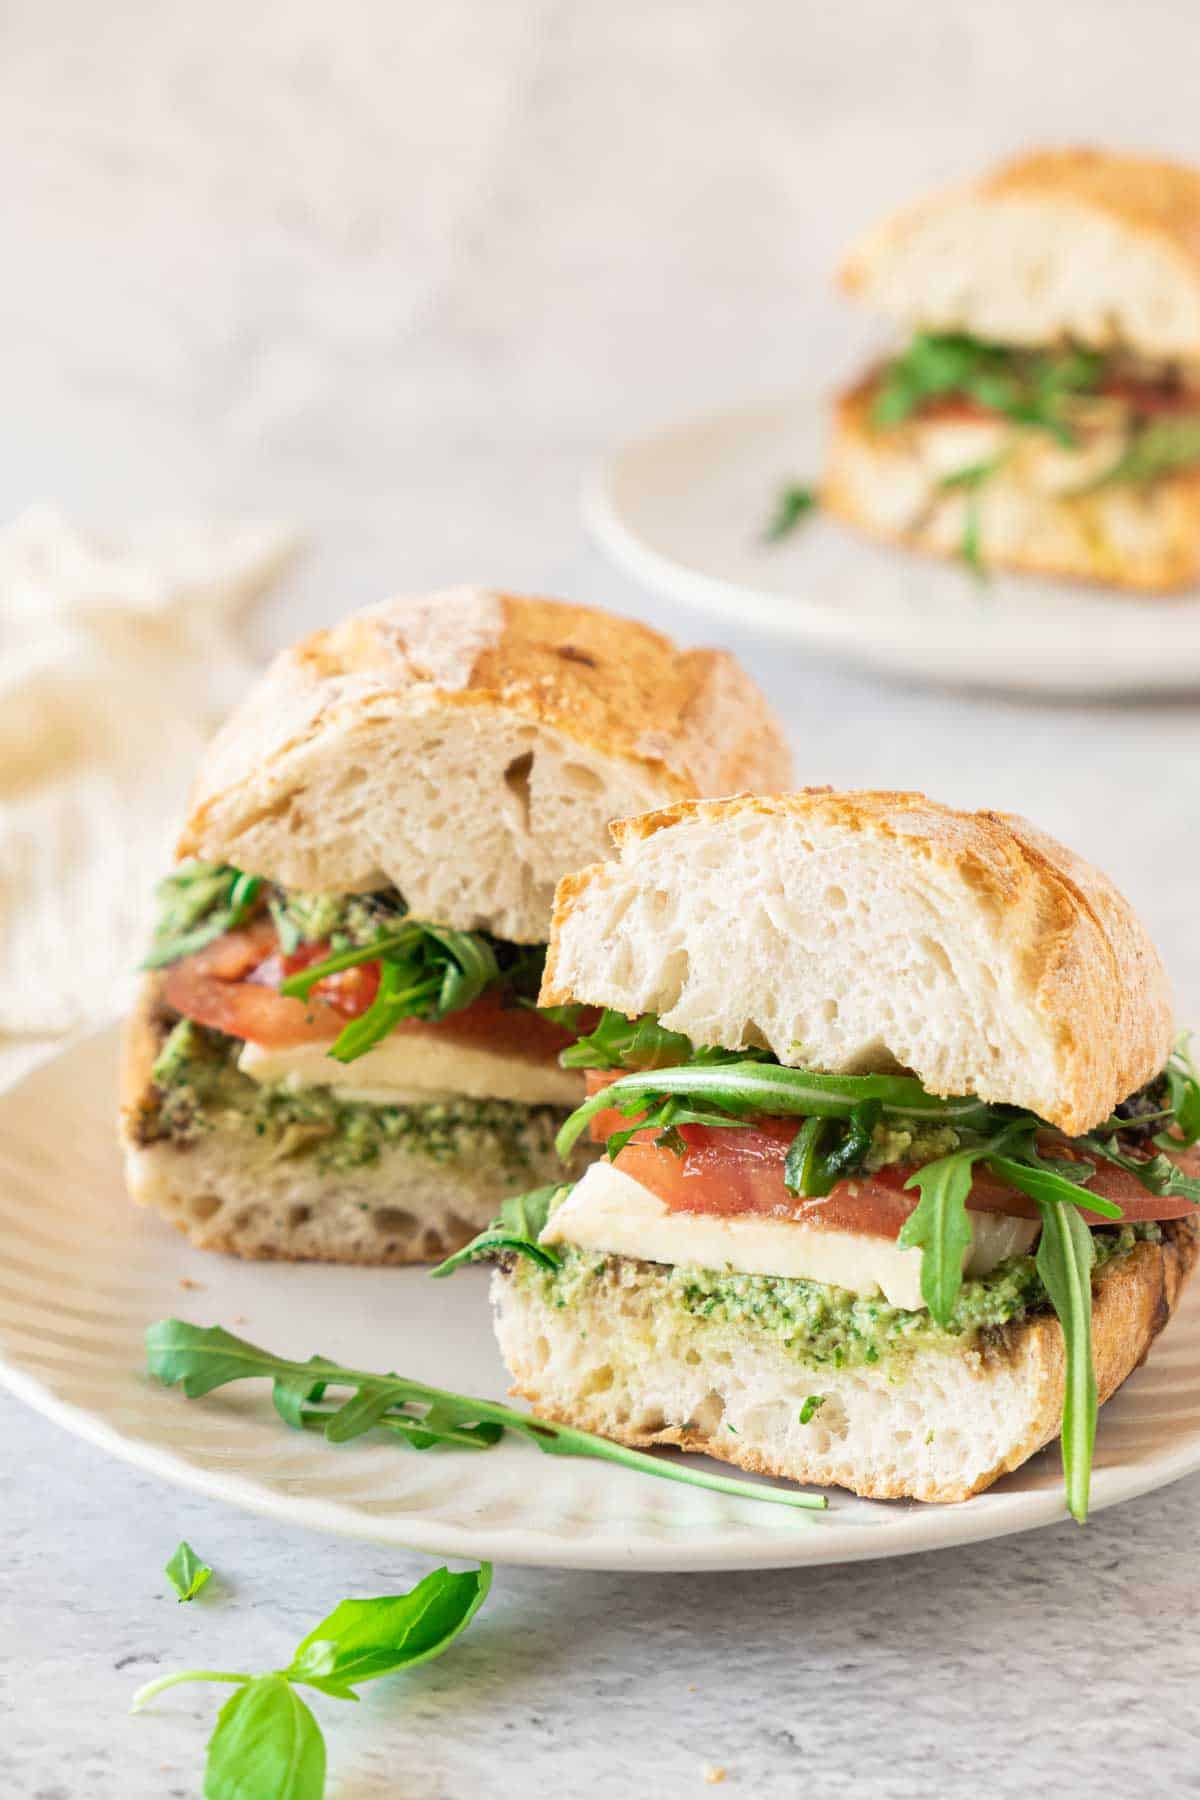 A Caprese sandwich with pesto, tomatoes and basil on a plate.